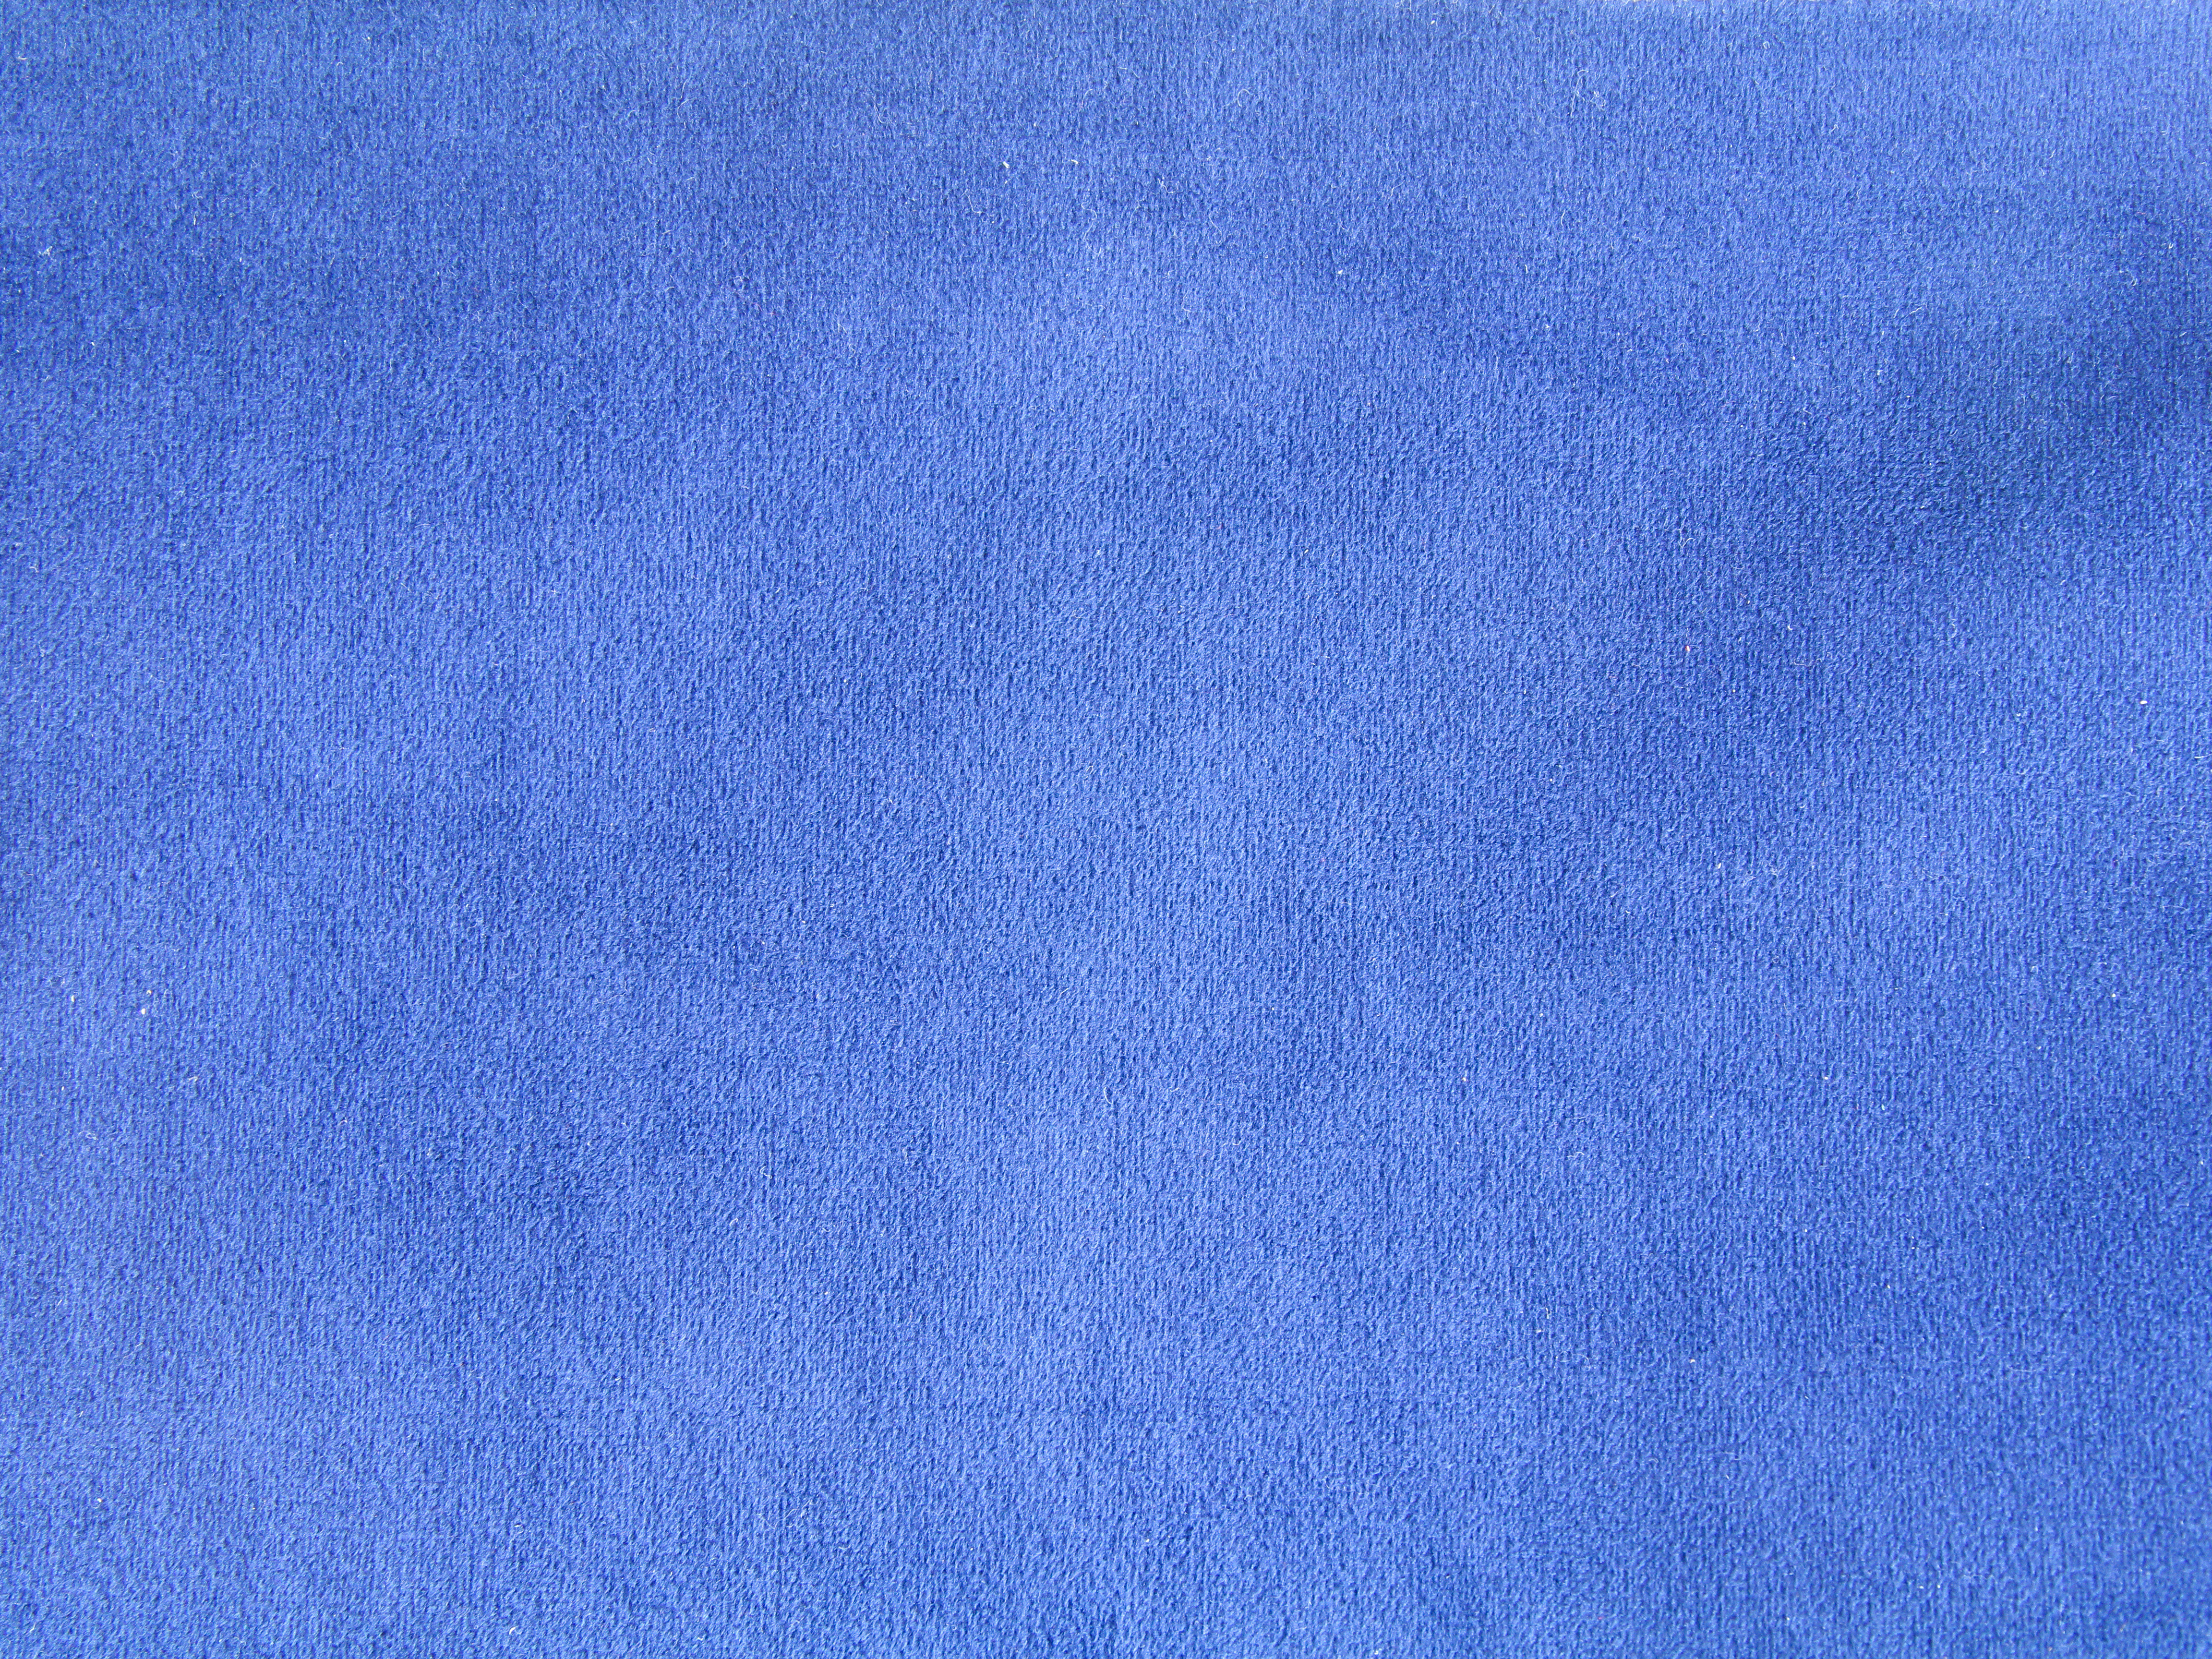 Blue Suede Texture Fuzzy Fabric Stock Photo Wallpaper X